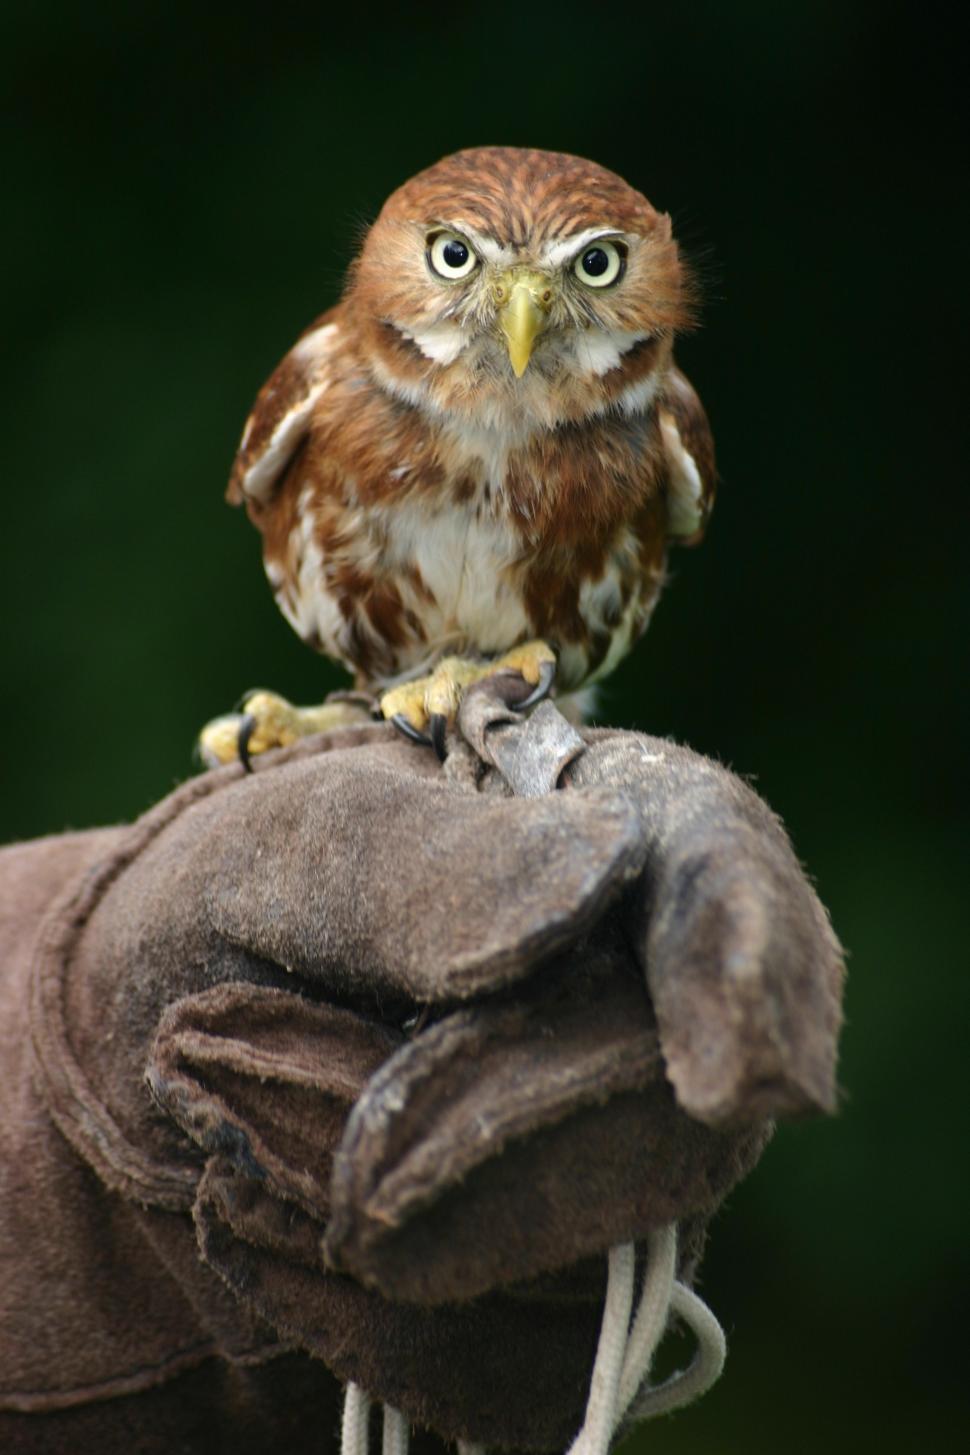 Free Image of Small Owl Perched on Glove 